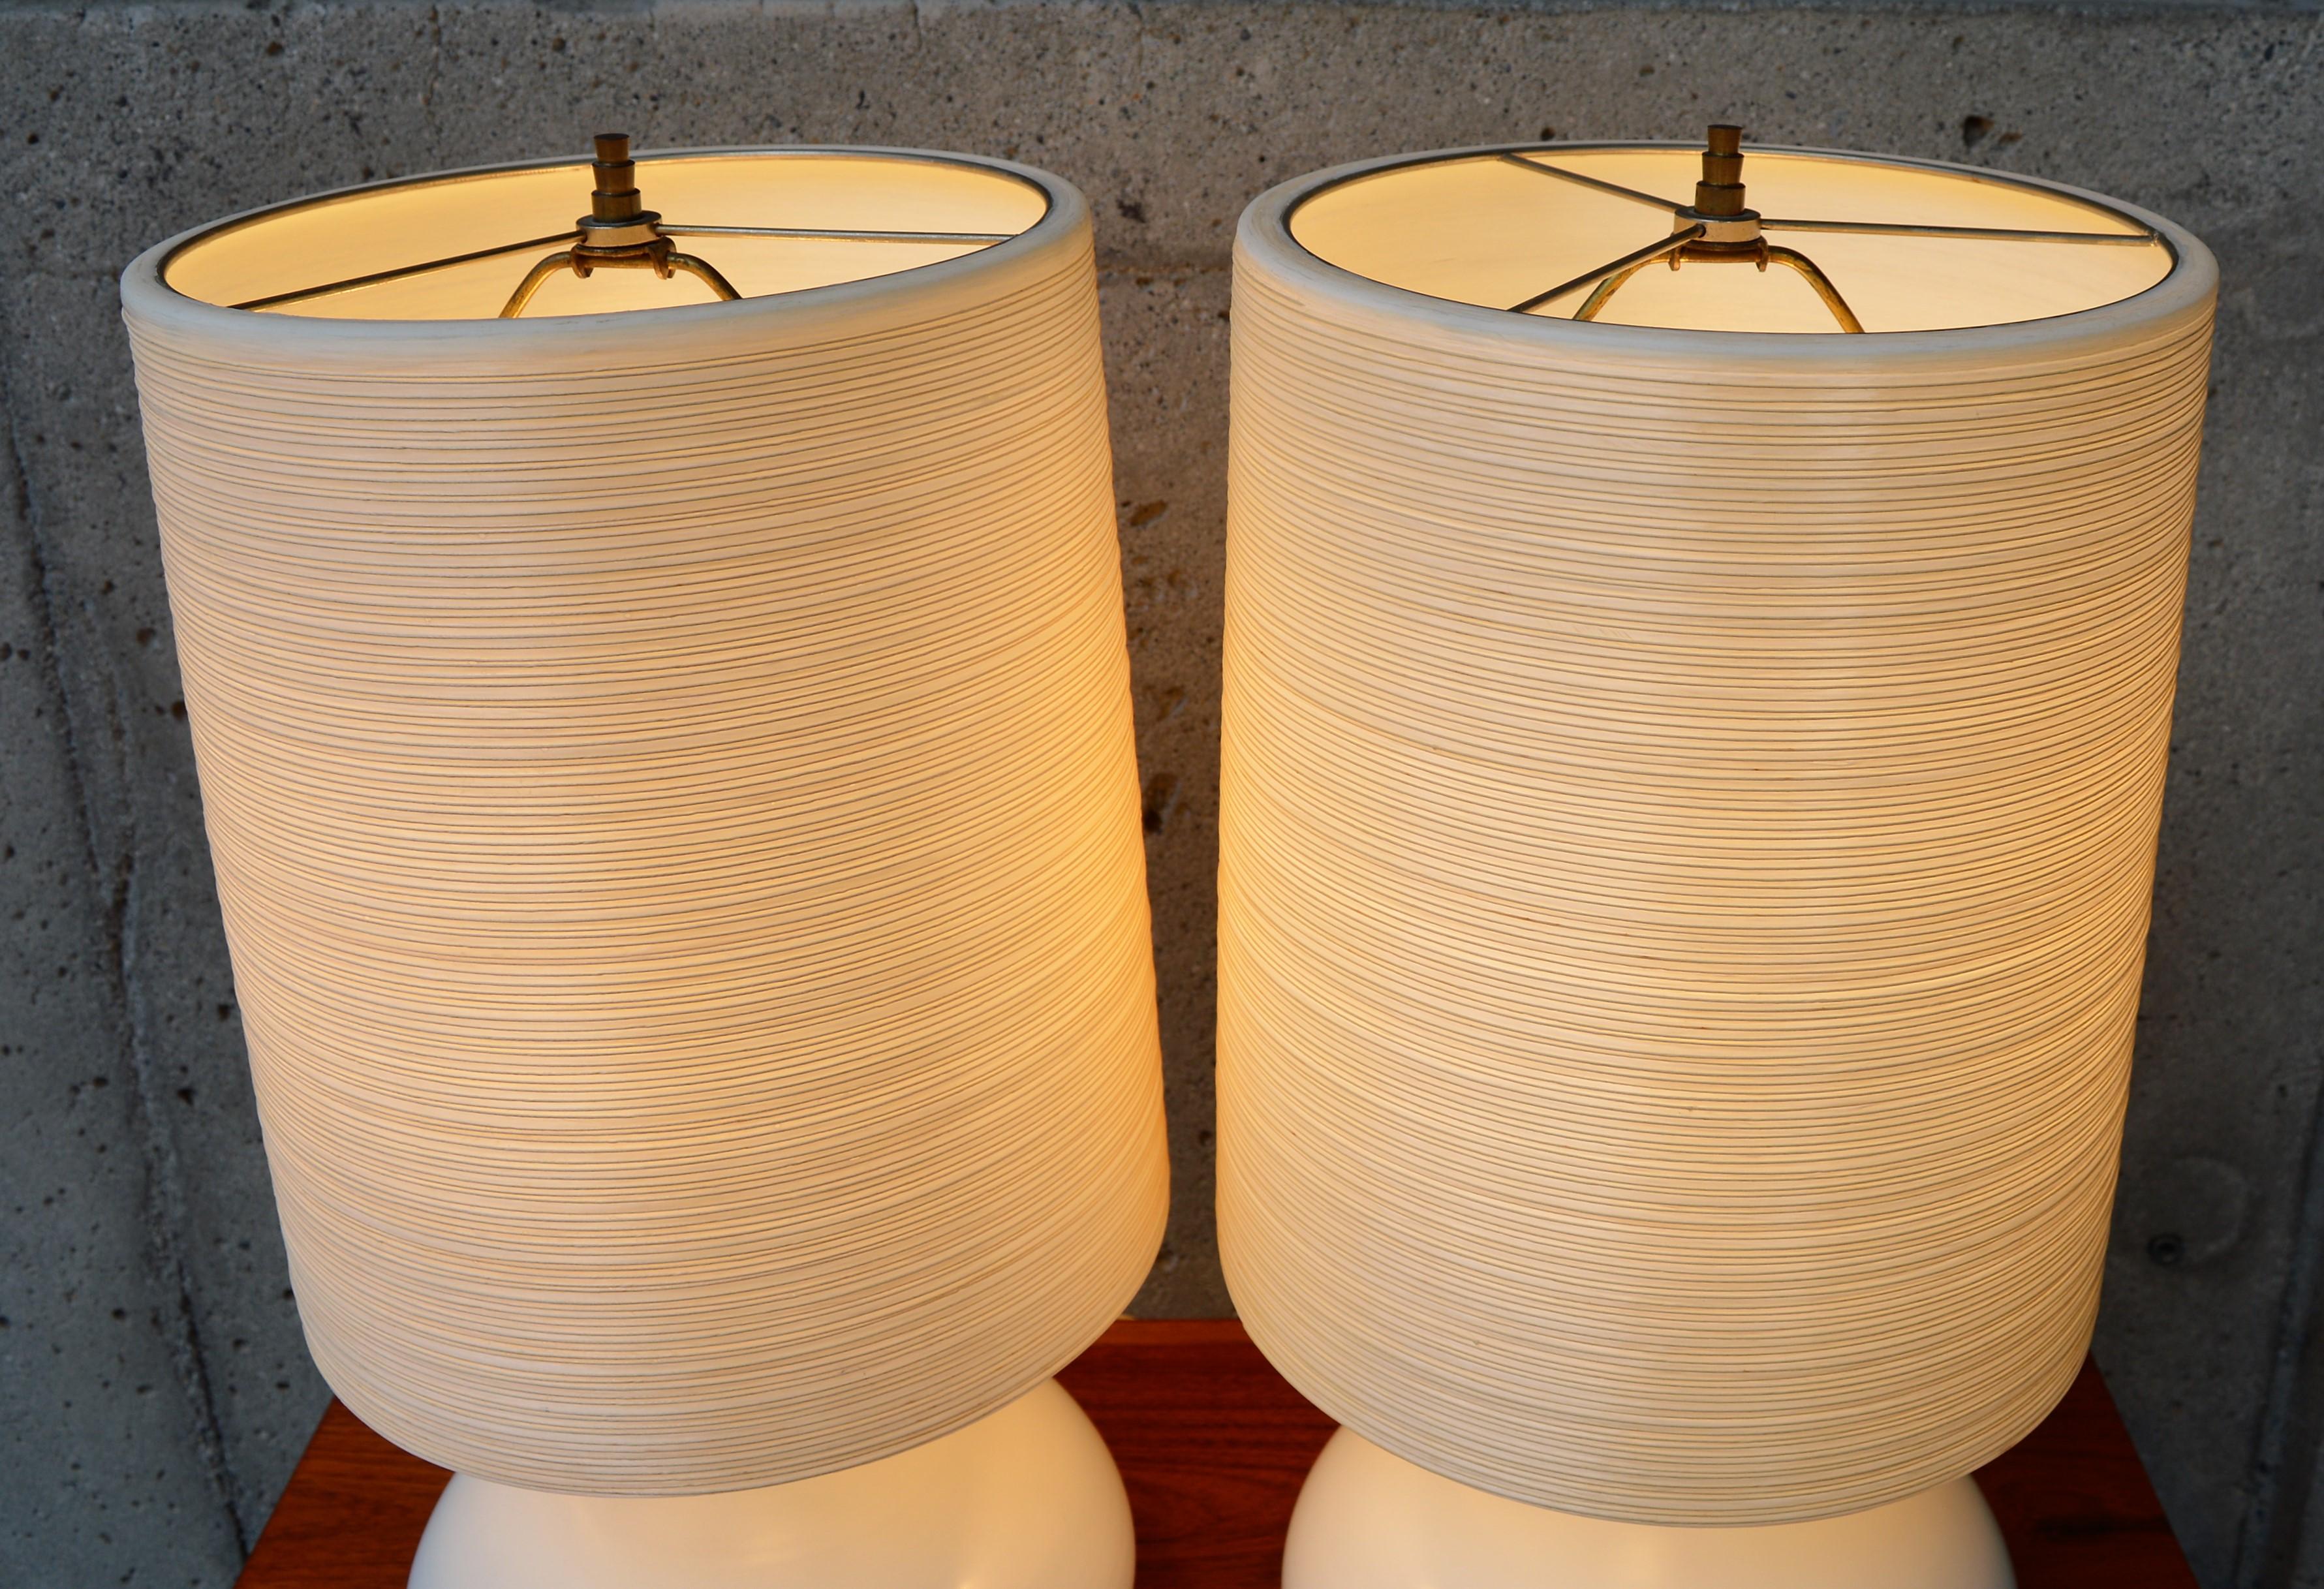 This lovely sculptural pair of ceramic lamps were designed and made by Lotte and Gunnar Bostlund in the 1960s. In an elegant off white that is timeless, and paired with their original Bostlund fiberglass conical shades with a hand-applied fiber